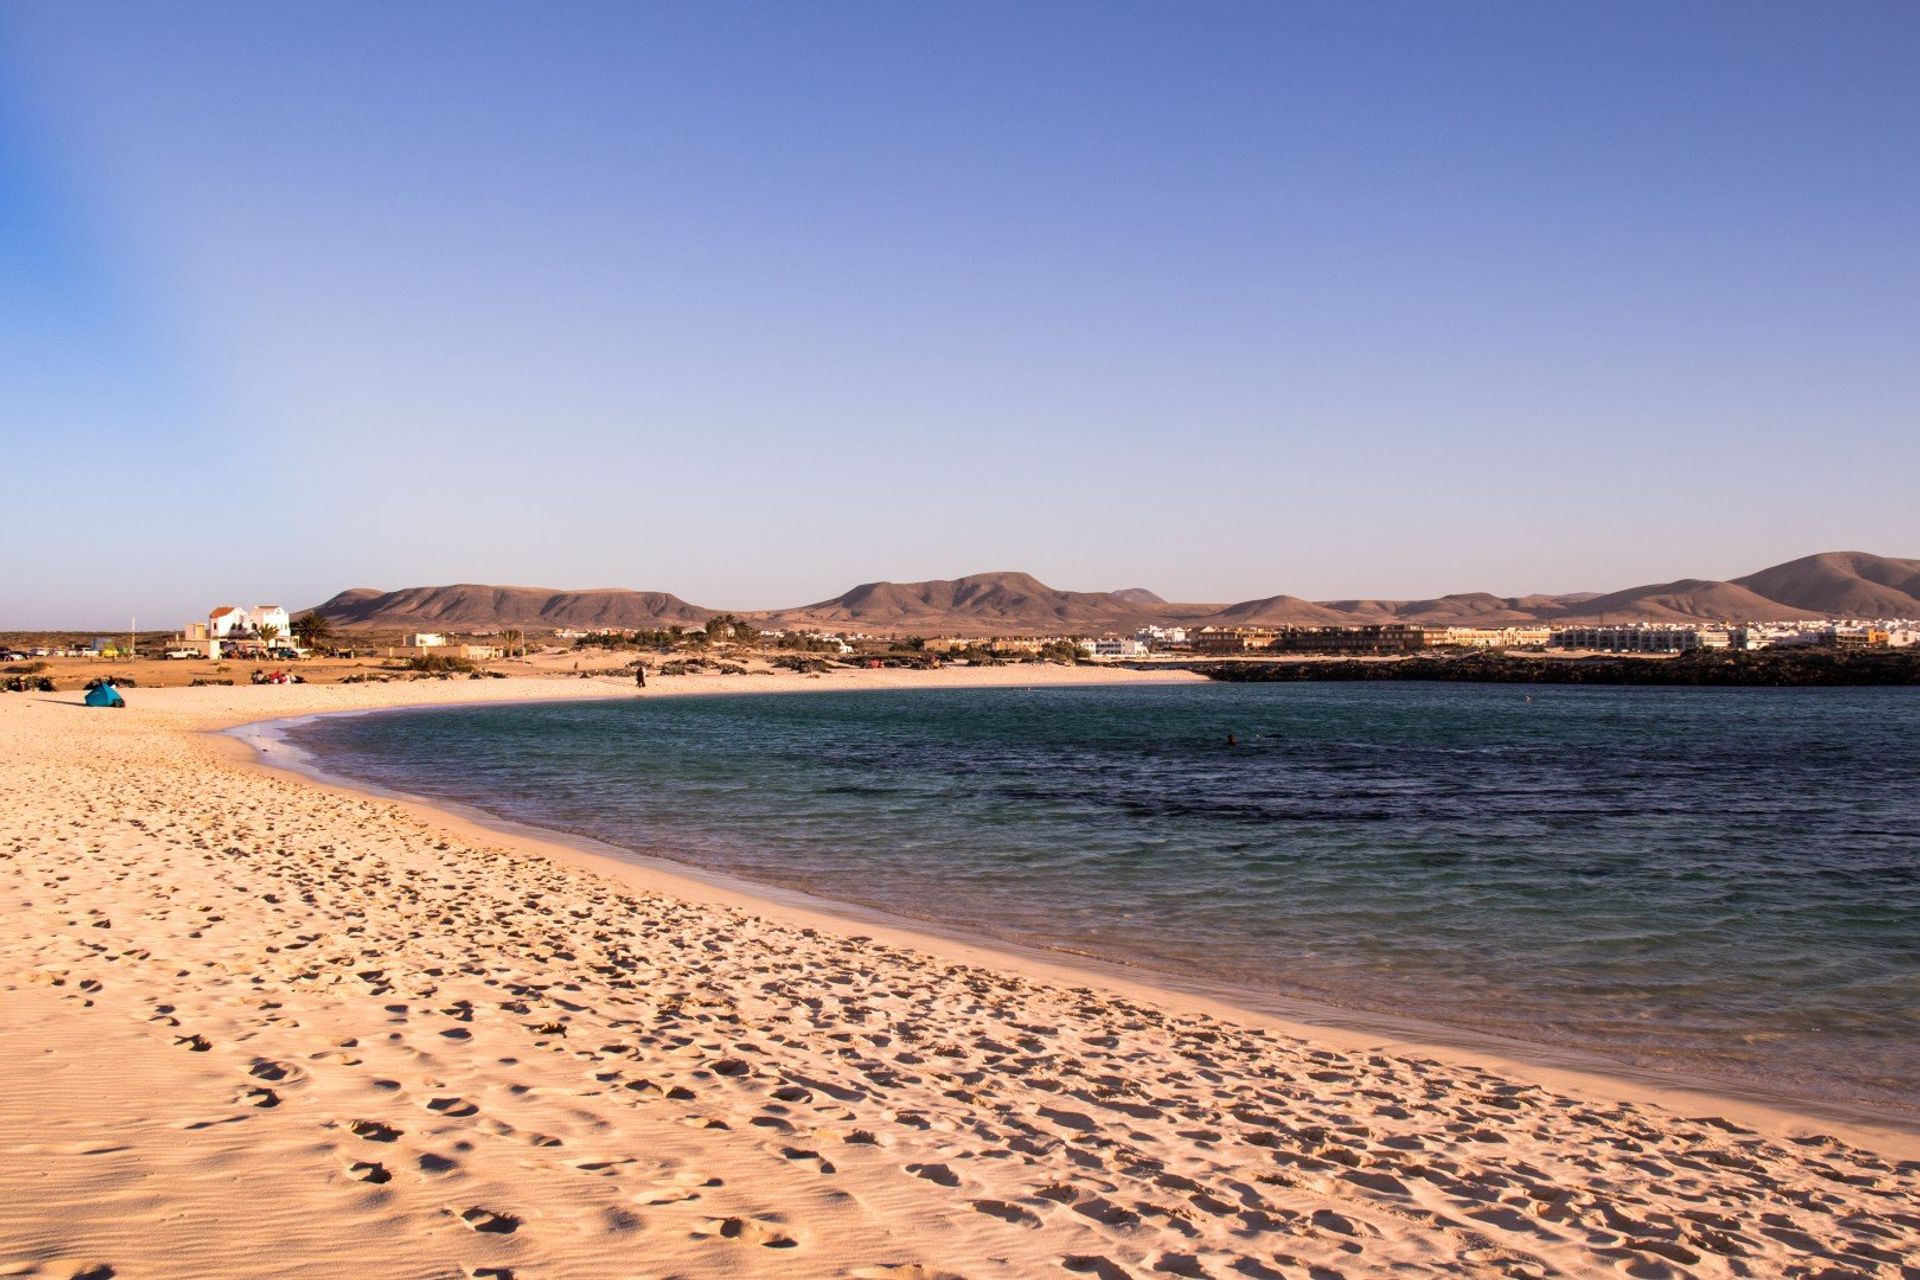 La Concha beach in El Cotillo with its turquoise waters and mountain backdrop